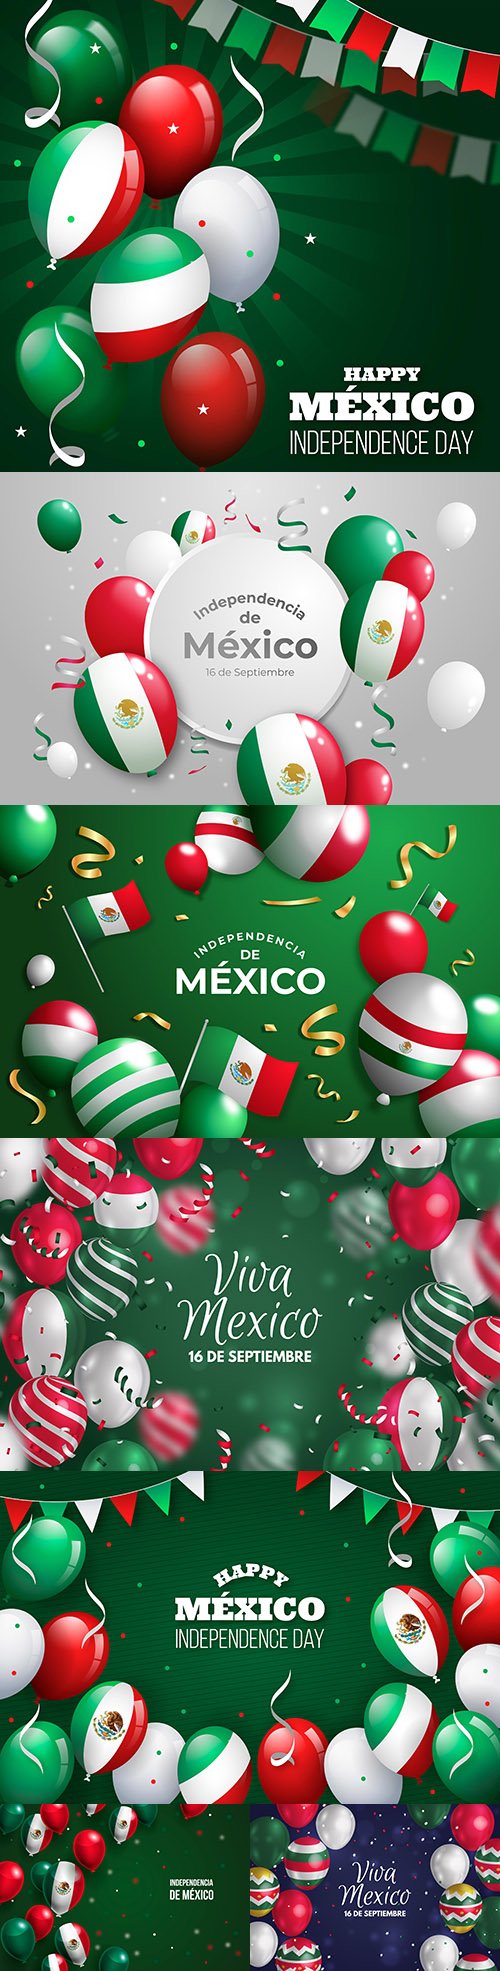 Mexican Independence Day realistic background with balloons